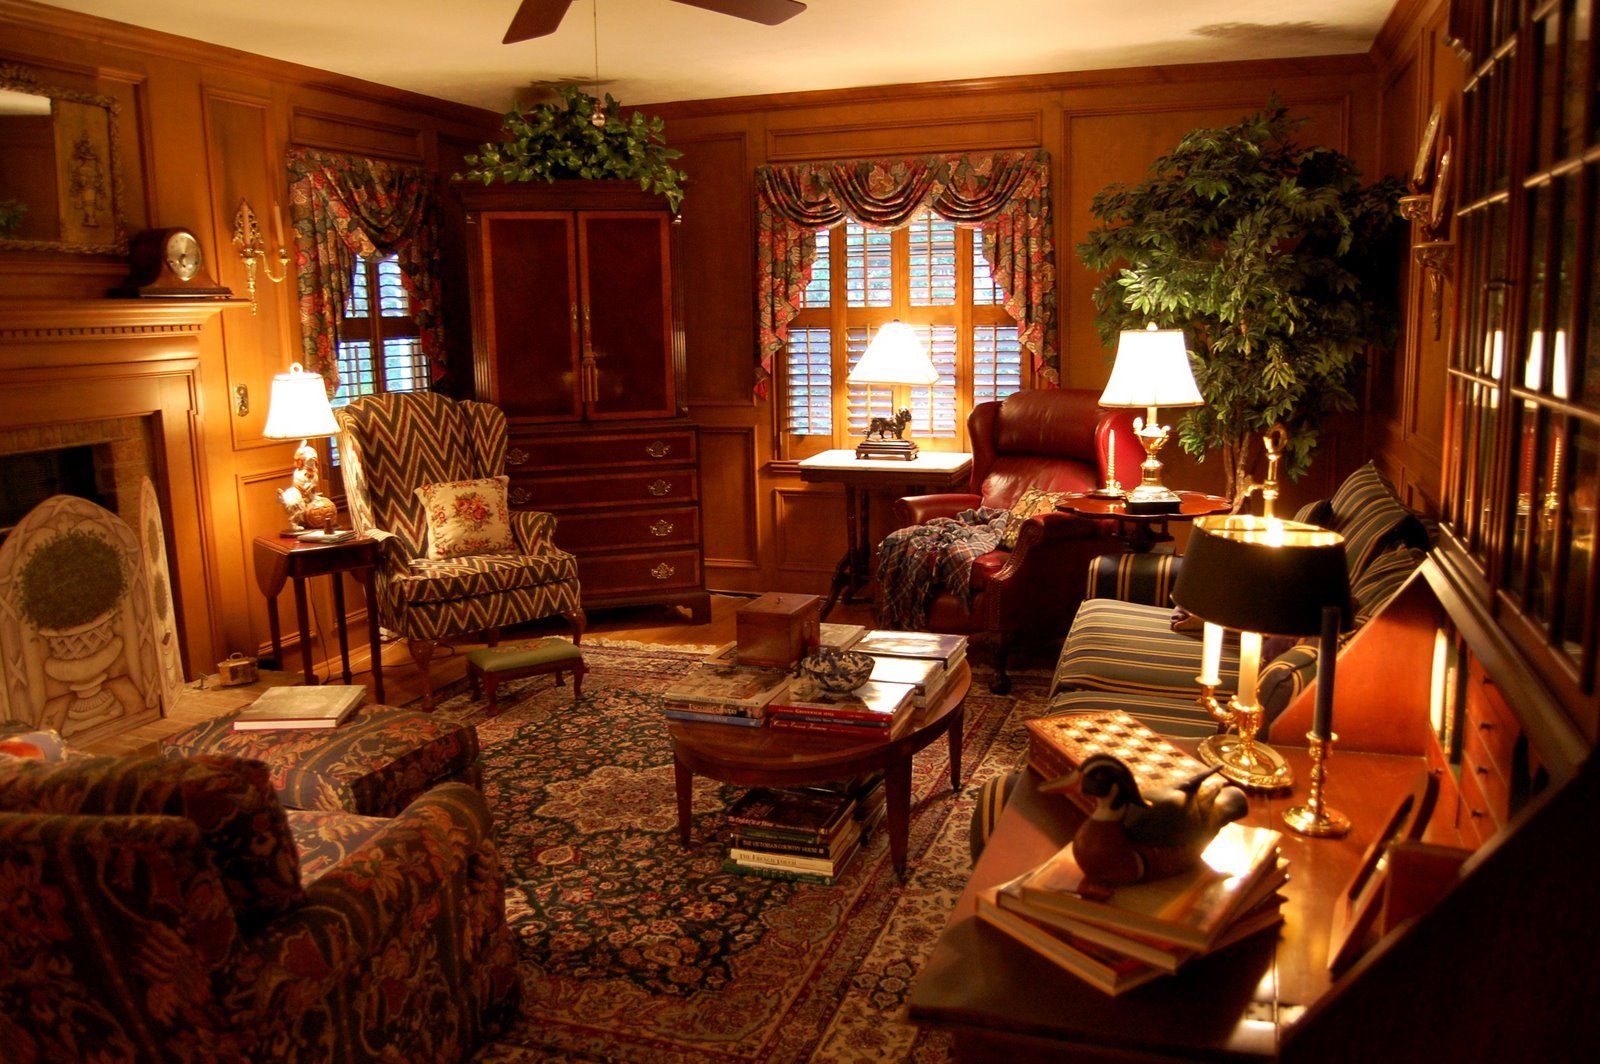 Country themed Living Room Decor Awesome Living Room Decorated In English Country Style Hunt theme